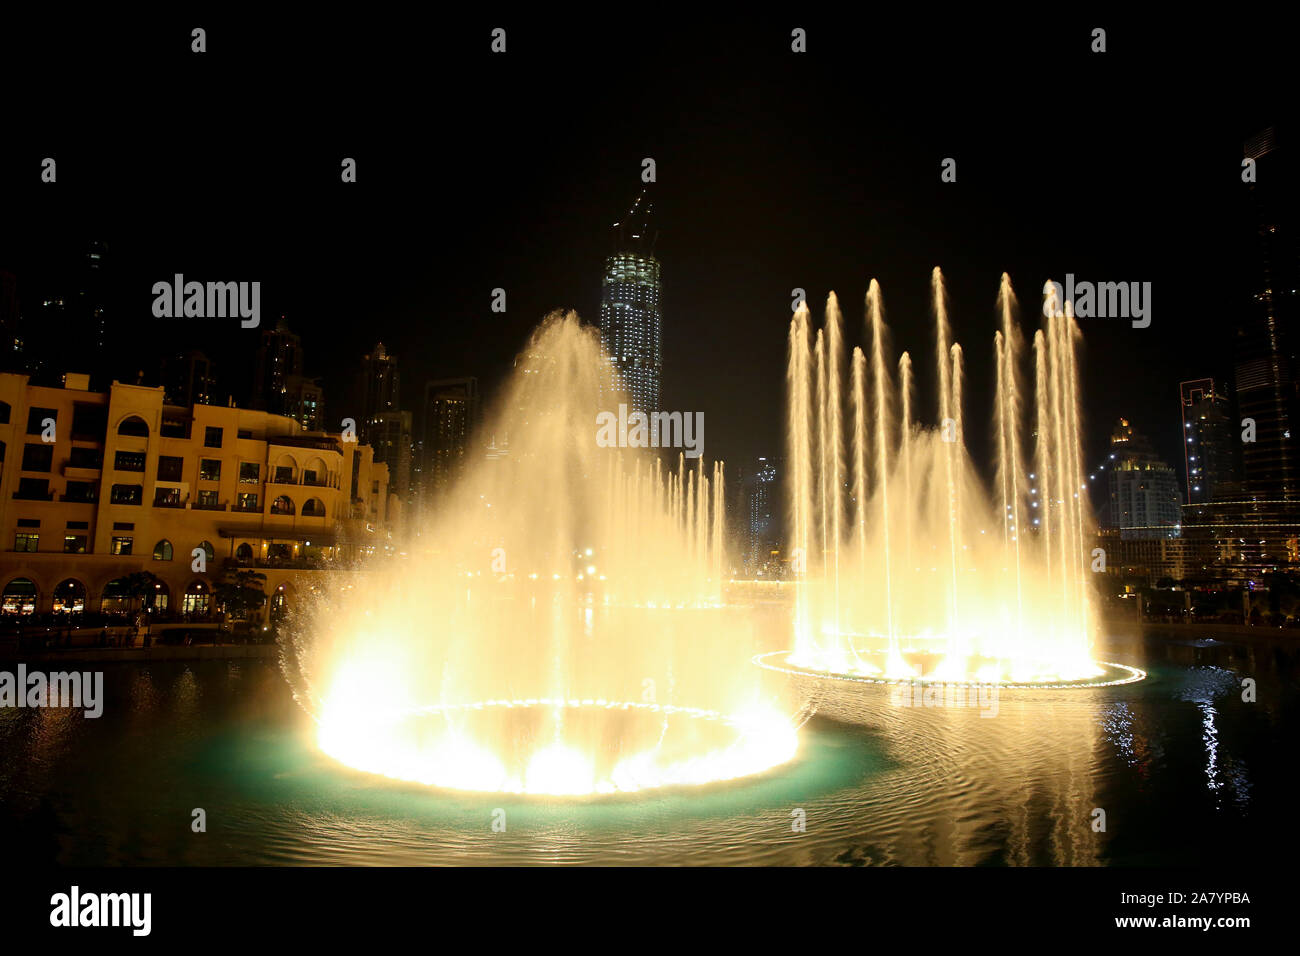 Water & Light show in the downtown city at night with all the skyscrappers illluminated and reflecting in the lake, Dubai, United Arab Emirates. Stock Photo